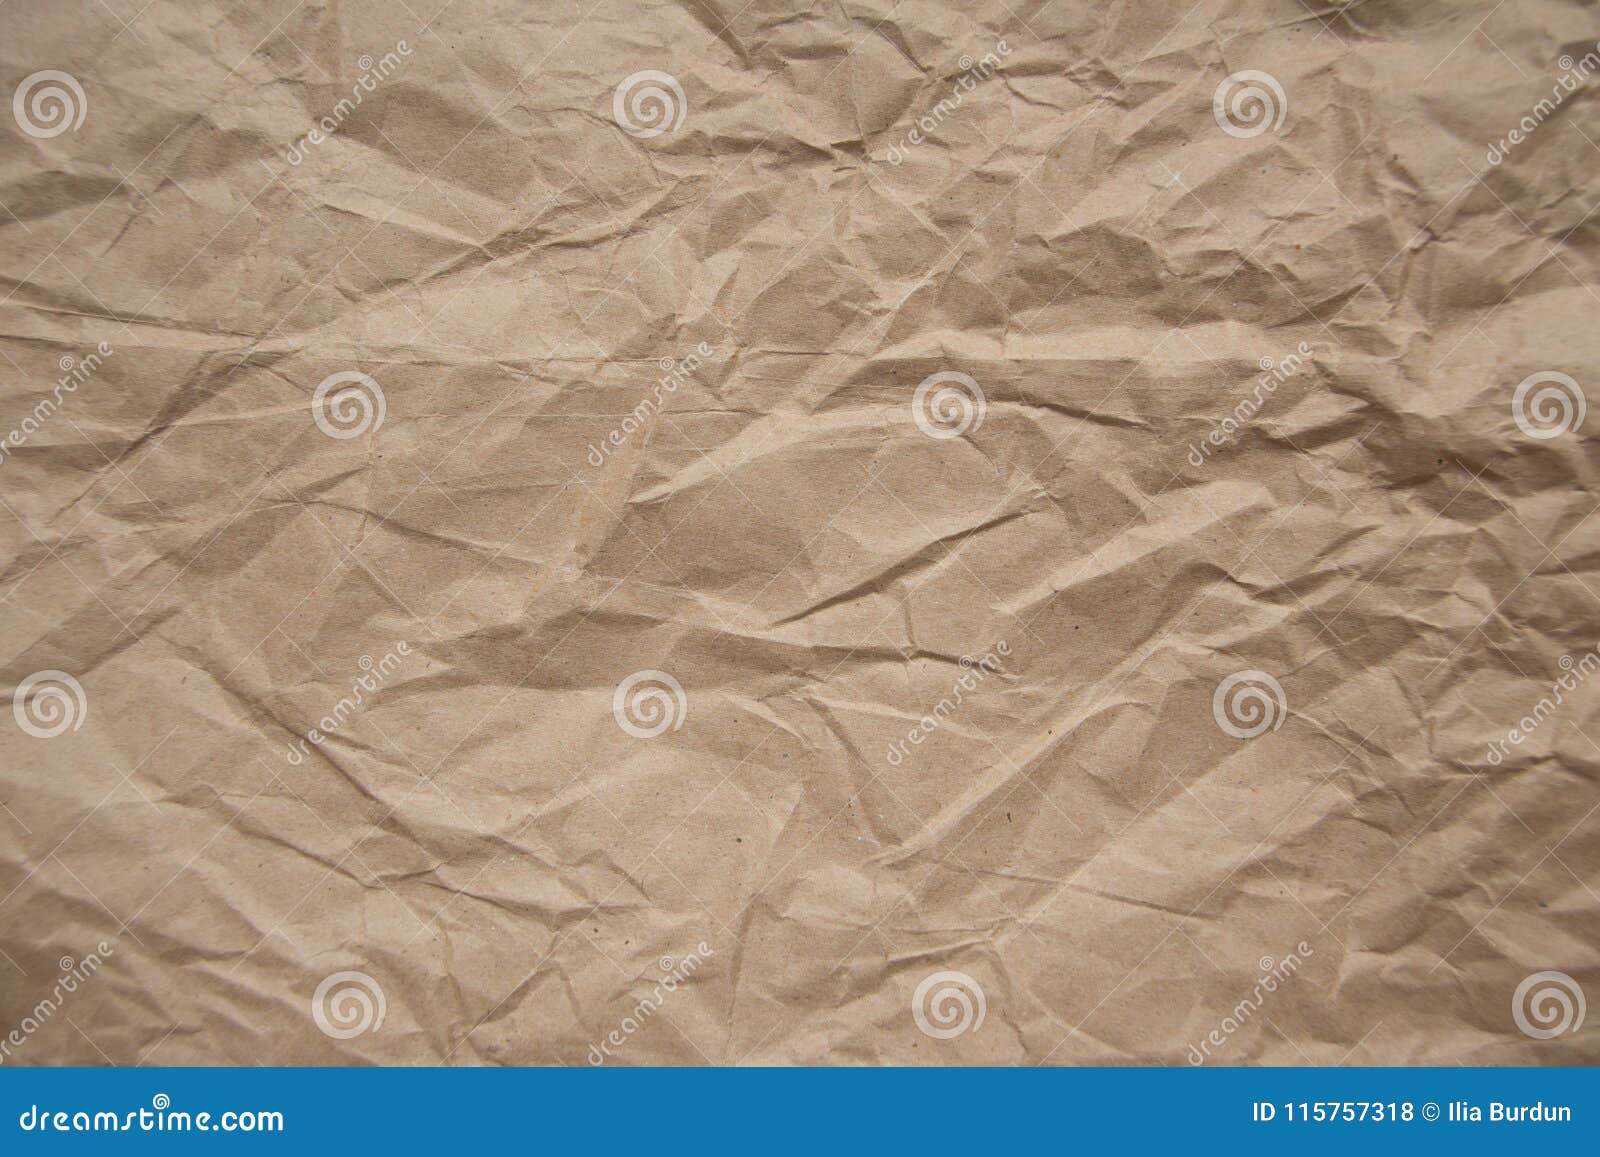 brown rough crumpled recycled paper texture